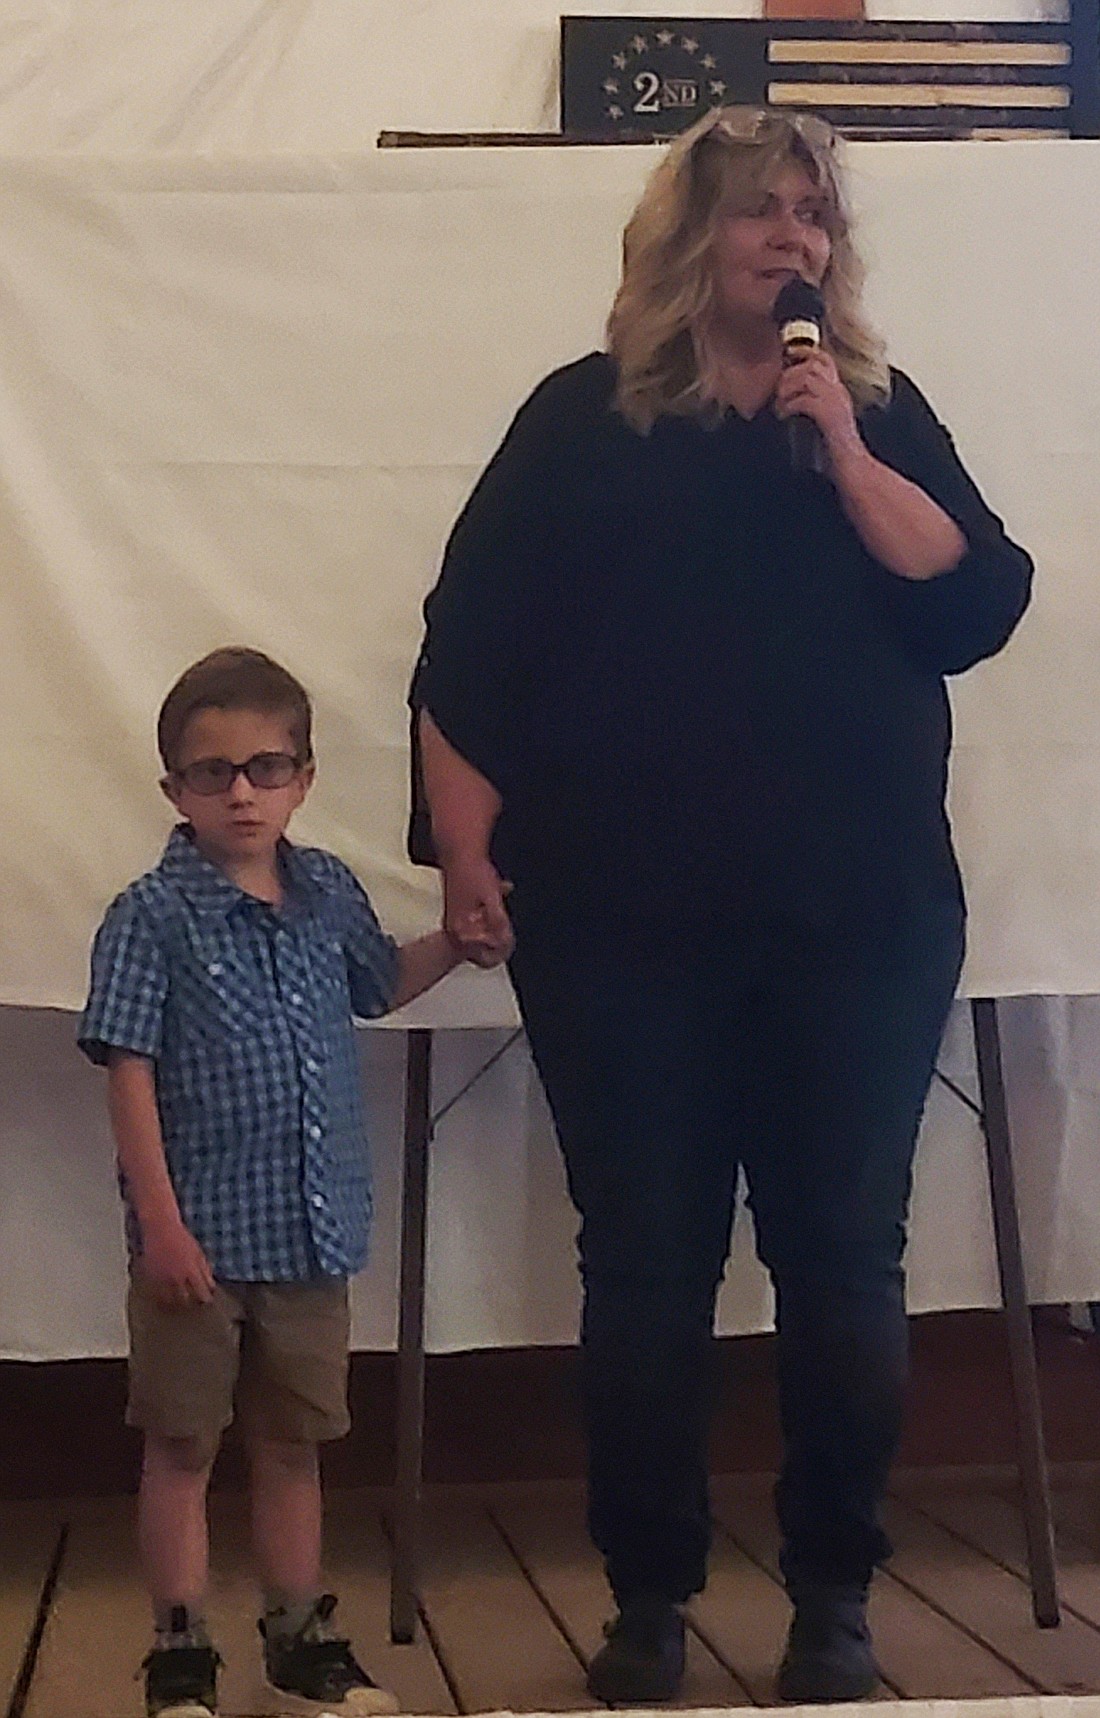 Tammy Stackhouse, founder of The Magical Meadows (R), talks at the nonprofit’s annual Rise Up event Saturday with Owen Siebeneck by her side. Photo by Jackie Gorski, Times-Union